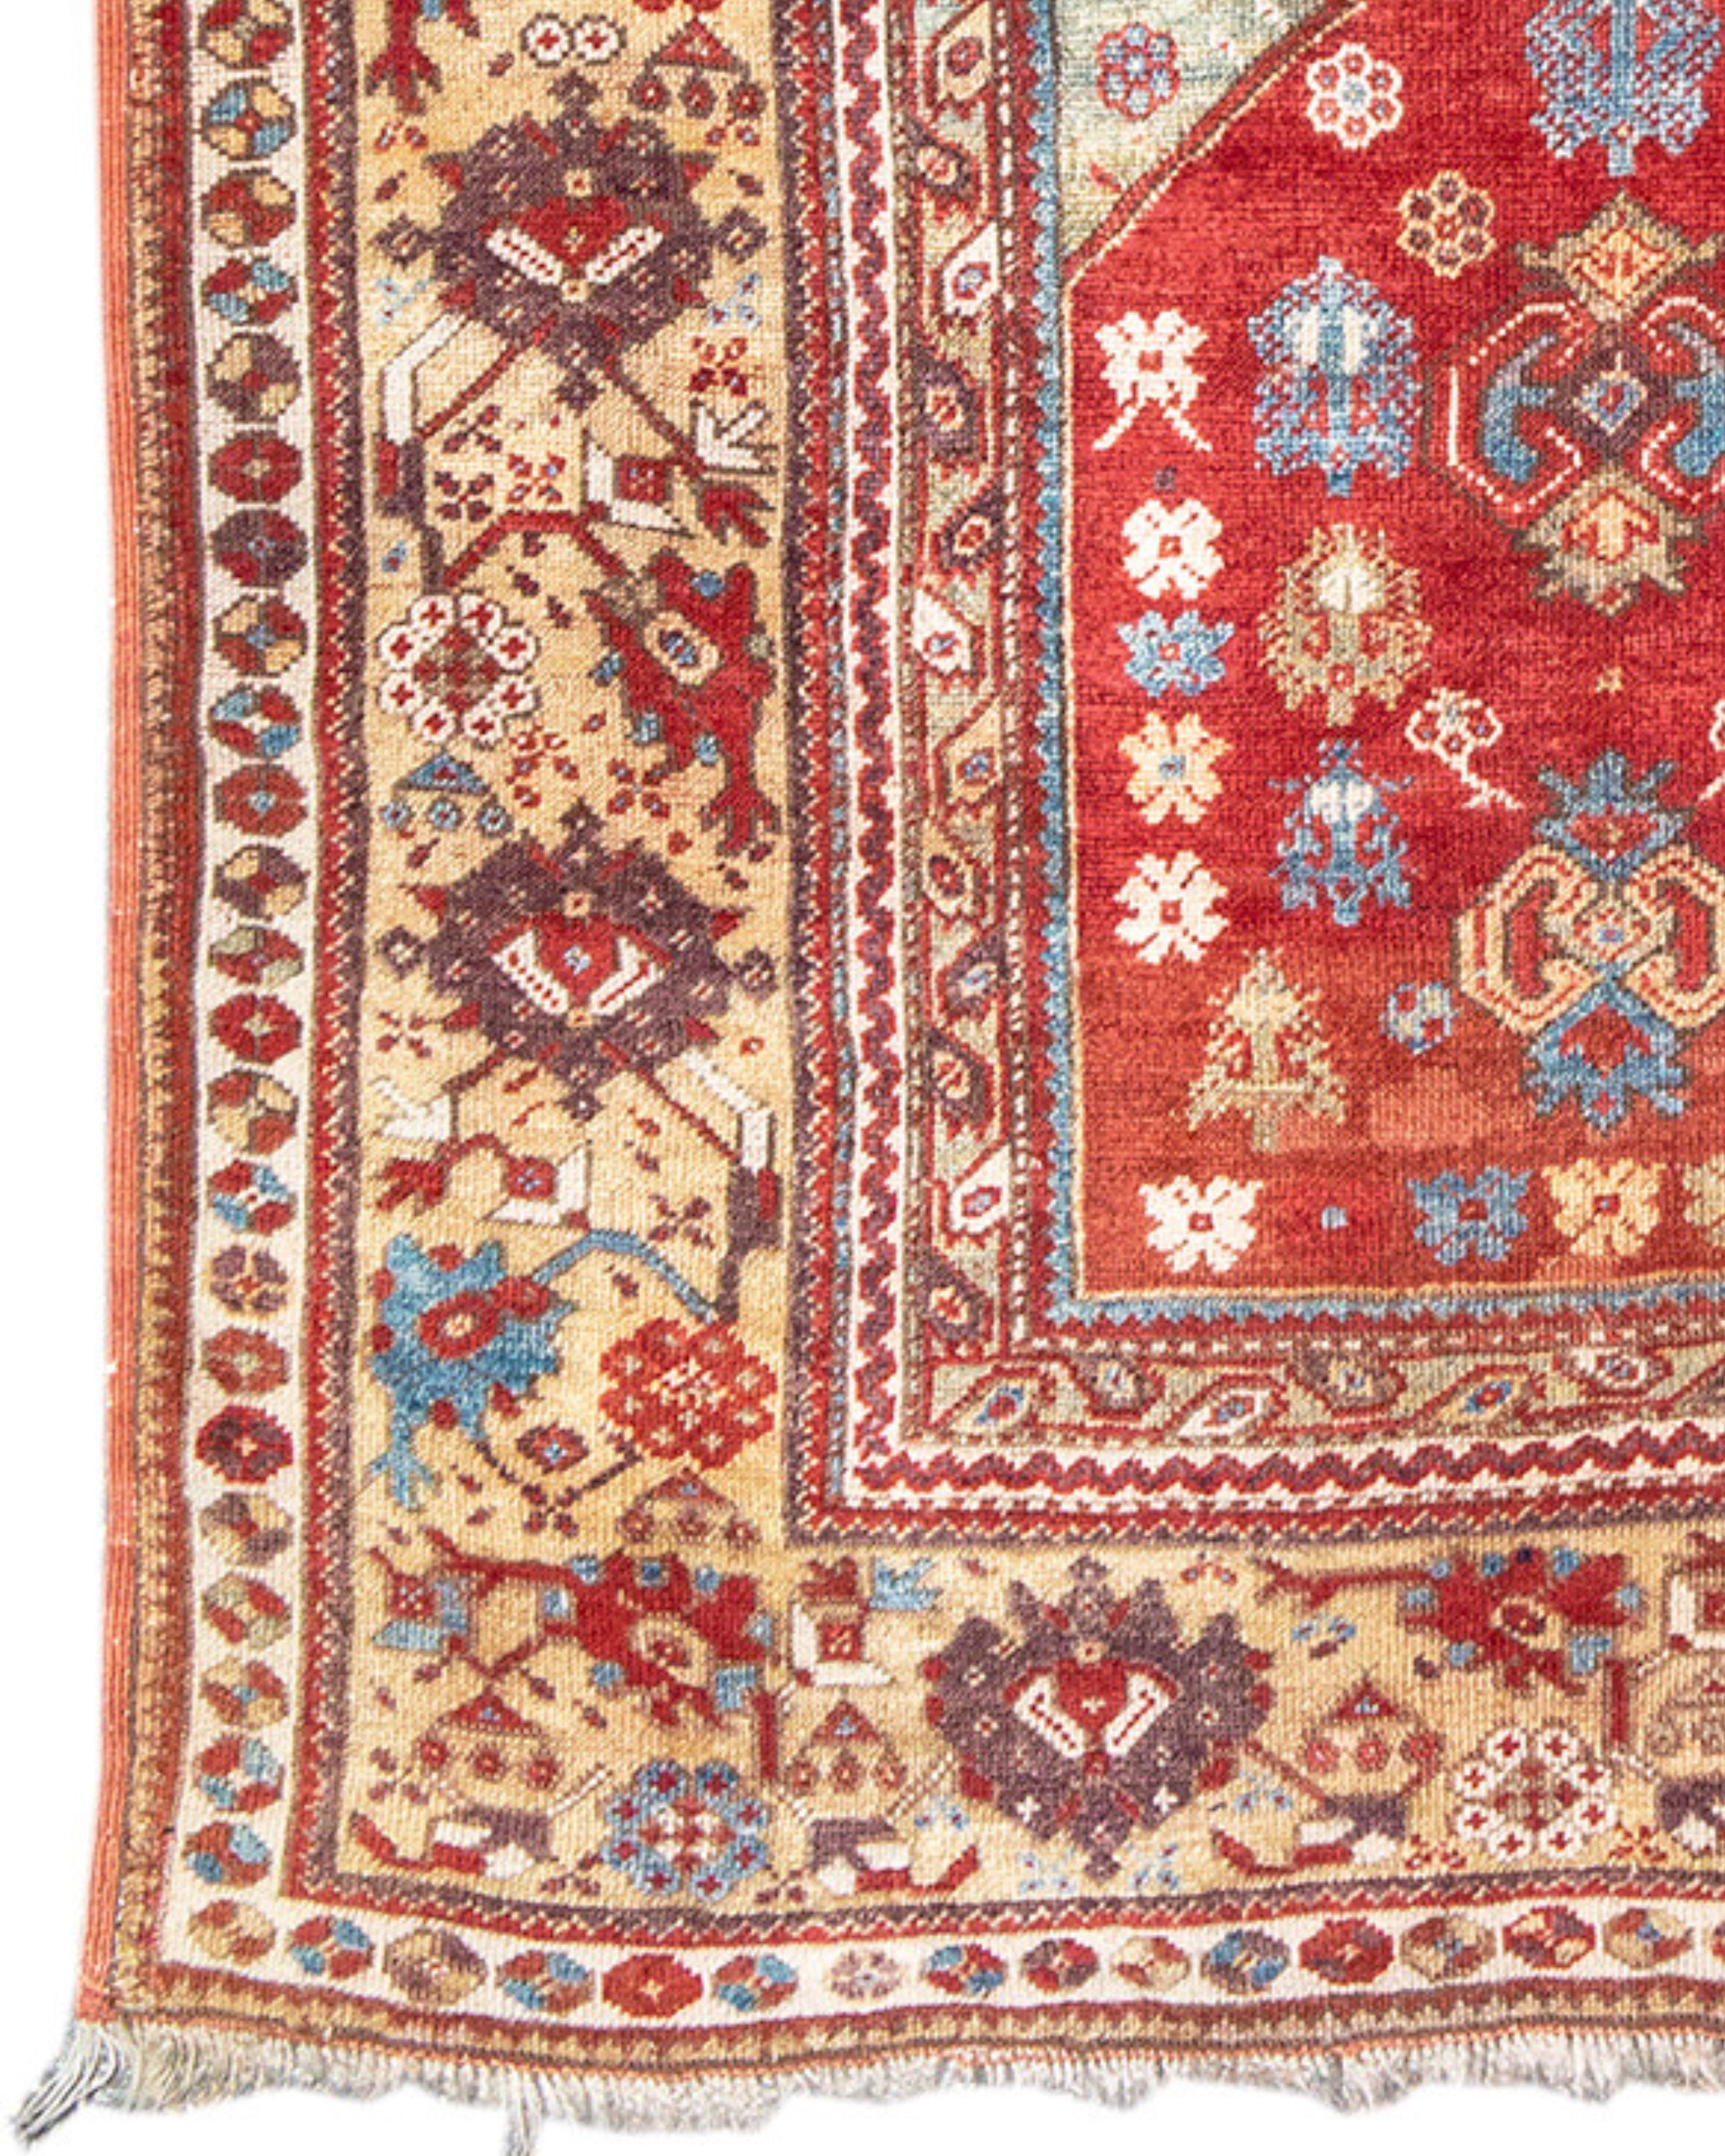 Antique Turkish Melas Rug, 19th Century In Excellent Condition For Sale In San Francisco, CA